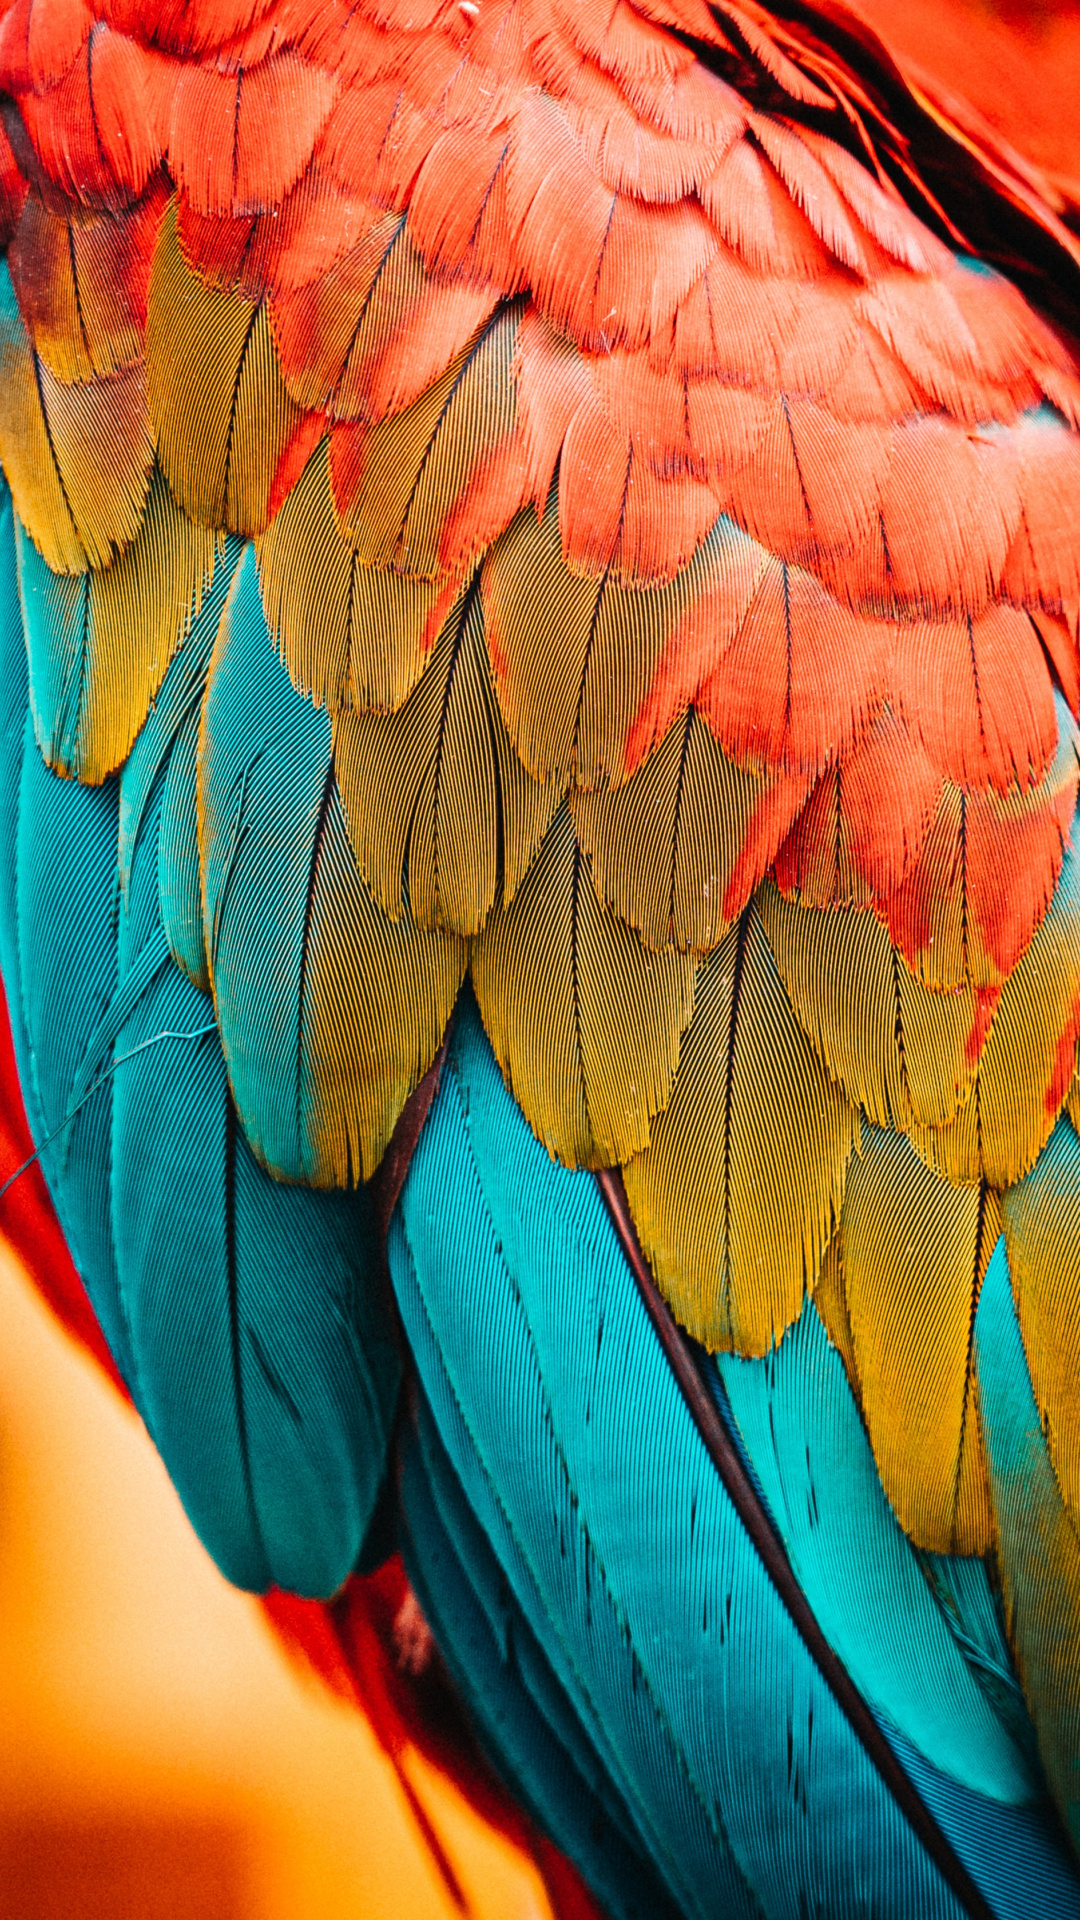 Feather: Diversity in plumage patterns, Multicolored. 1080x1920 Full HD Wallpaper.